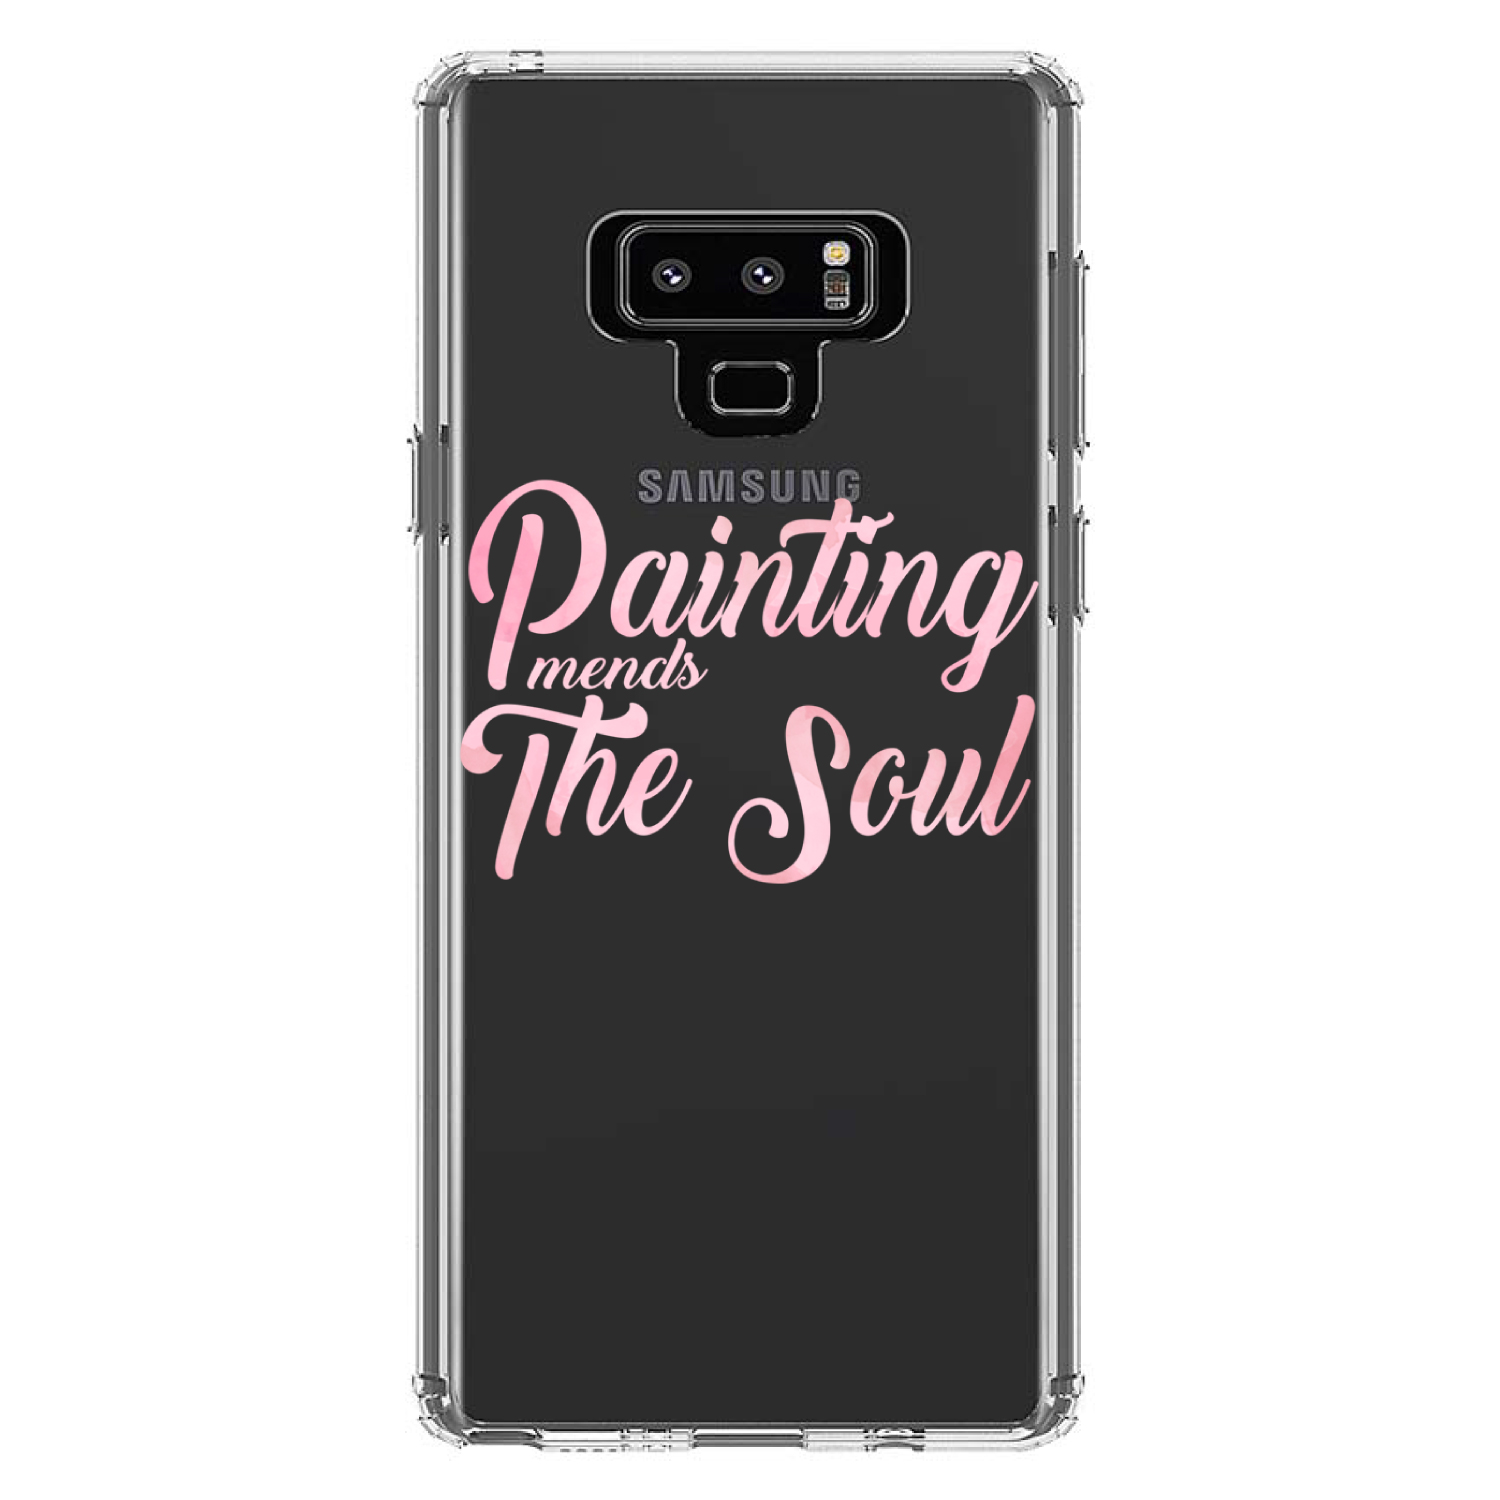 Clear Case for Galaxy S (Pick Model) Painting Mends the Soul | eBay